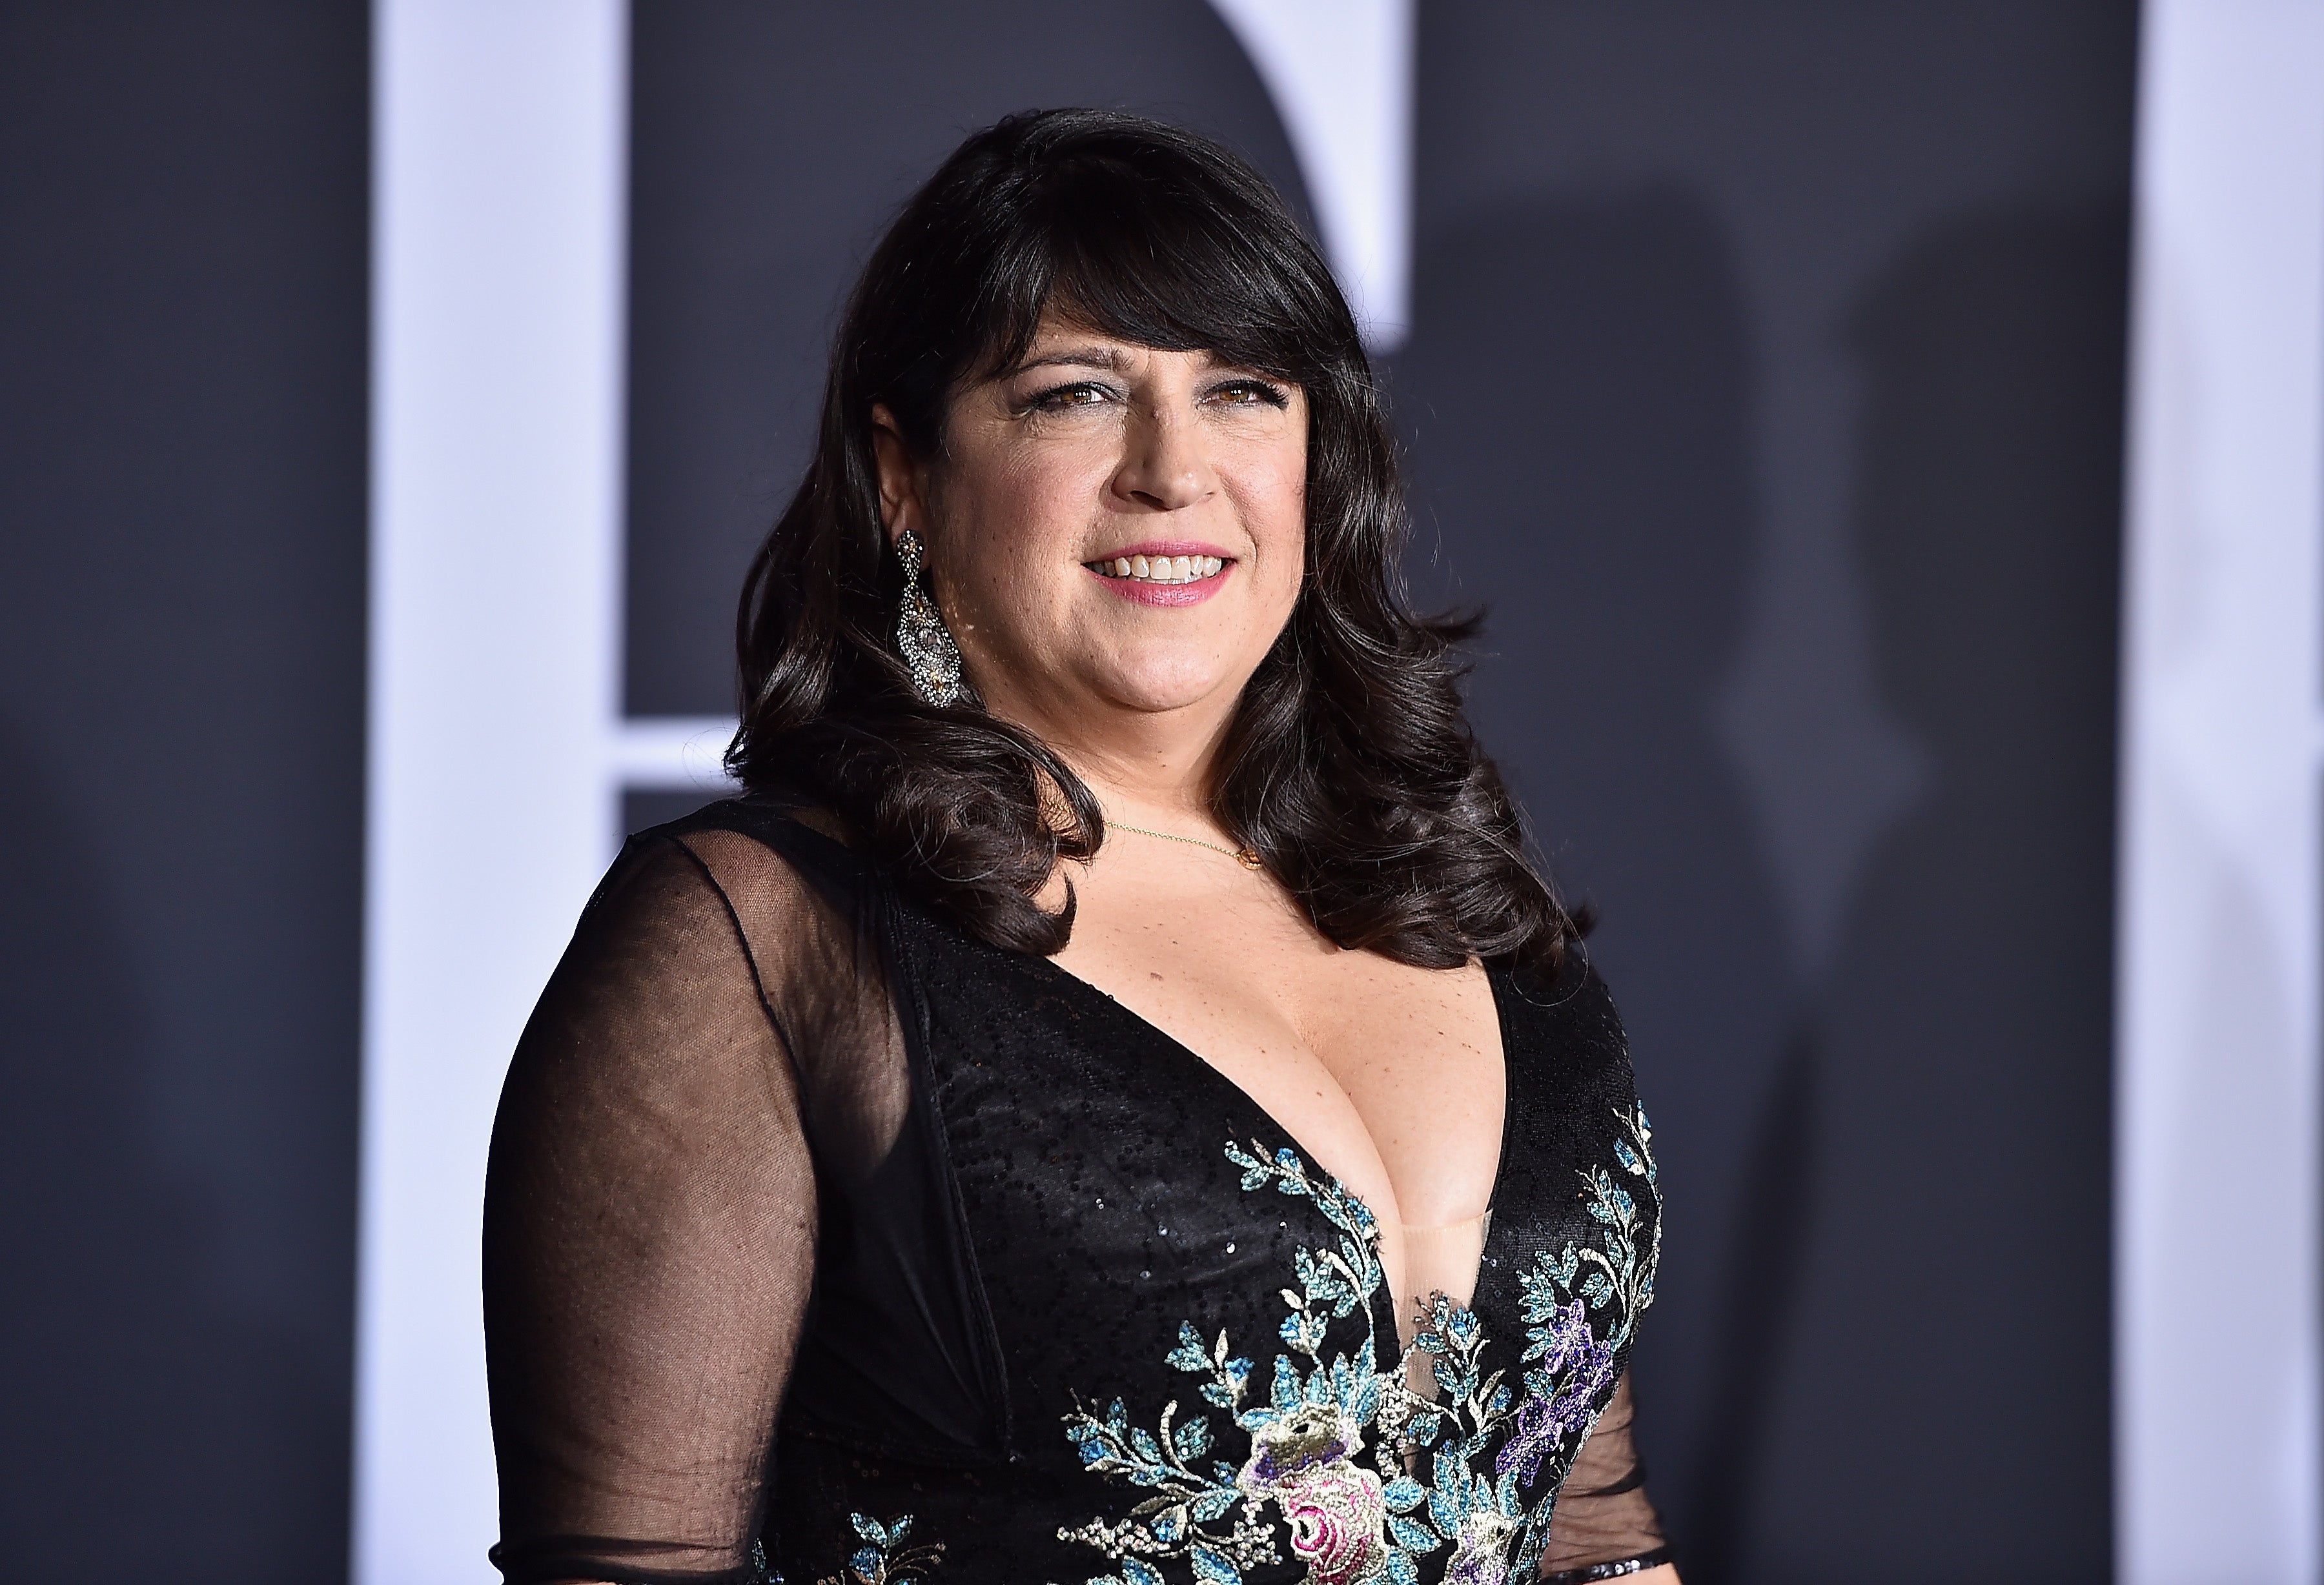 EL James, the author of the ‘Fifty Shades of Grey’ books